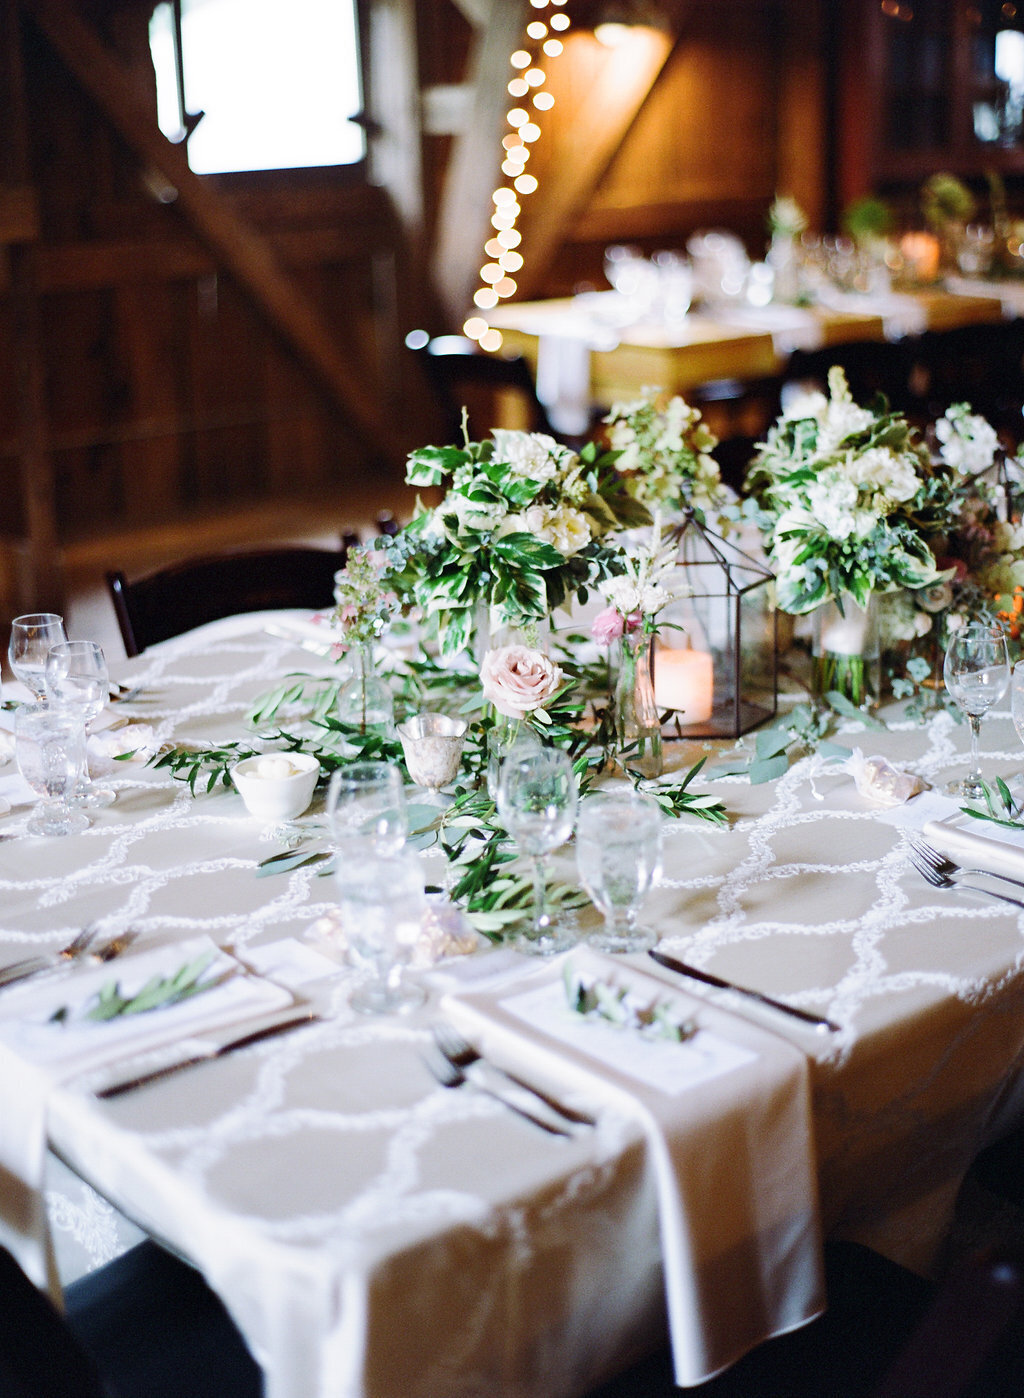 Centerpiece and table settings for a classic green and white wedding